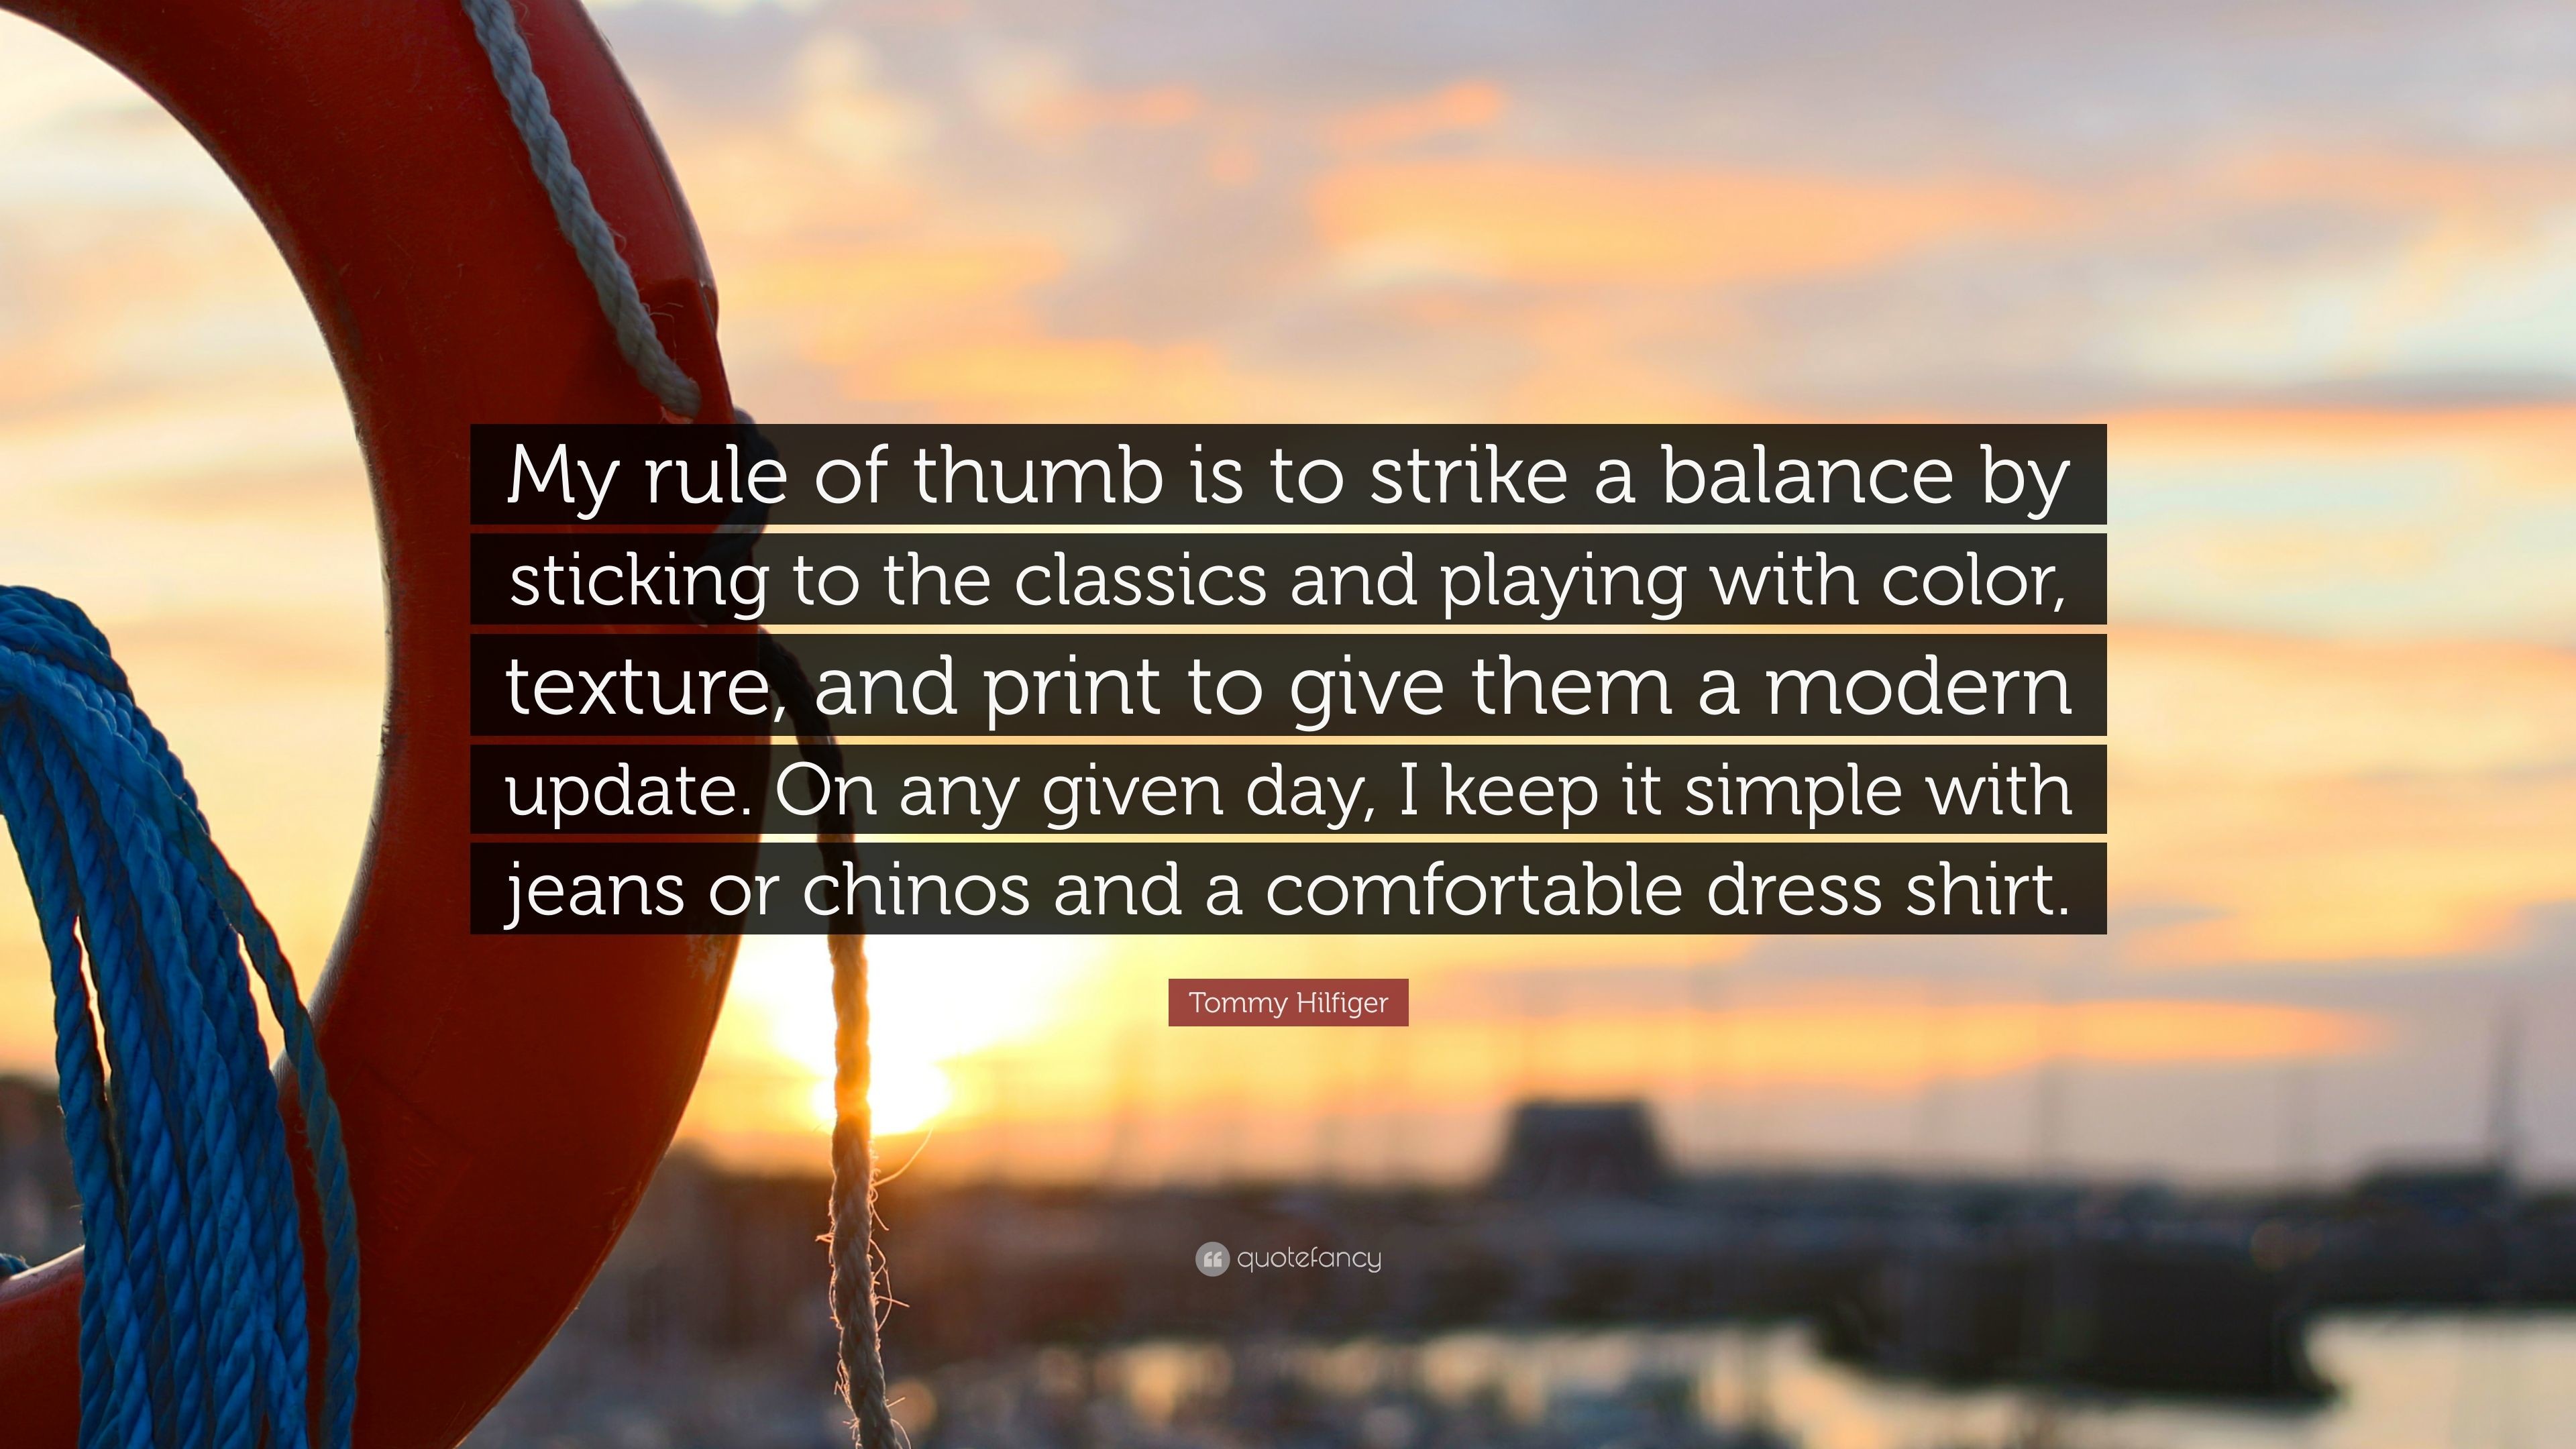 3840x2160 Tommy Hilfiger Quote: “My rule of thumb is to strike a balance by sticking